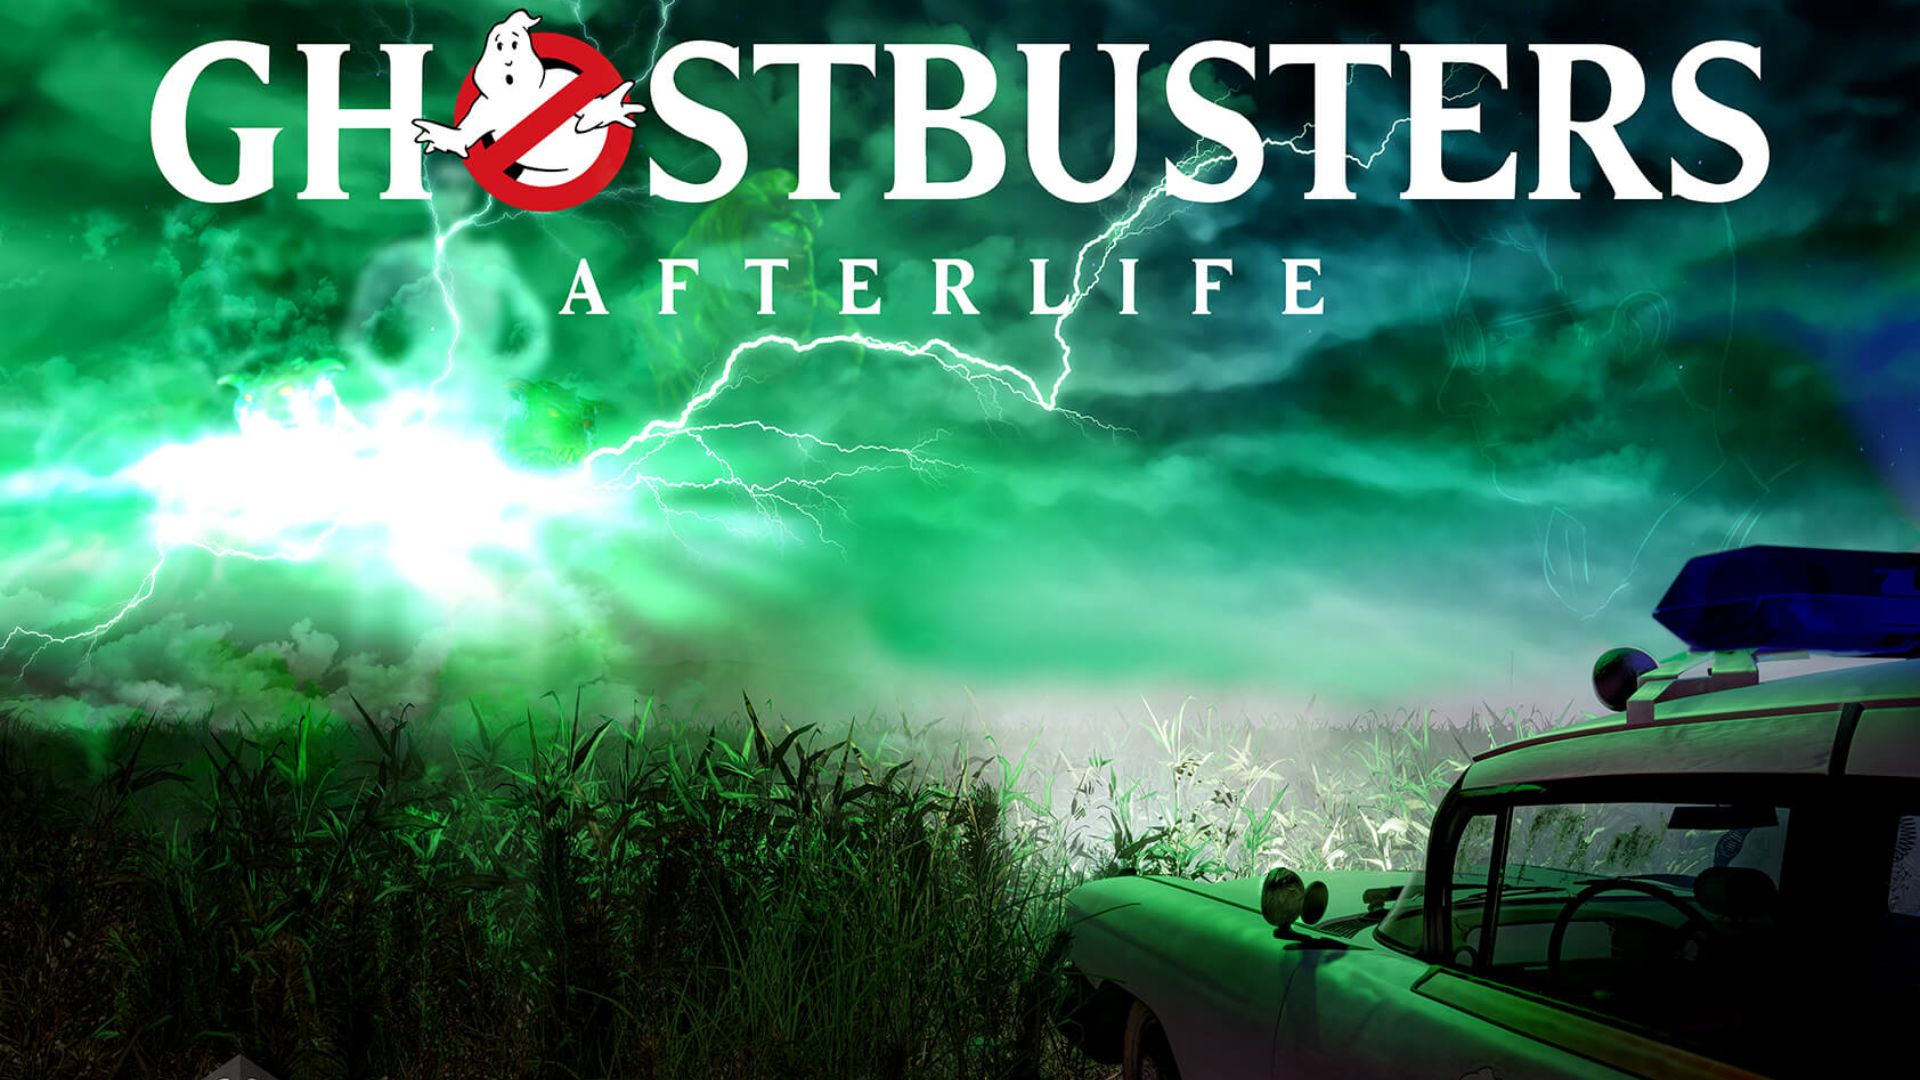 ghostbusters afterlife